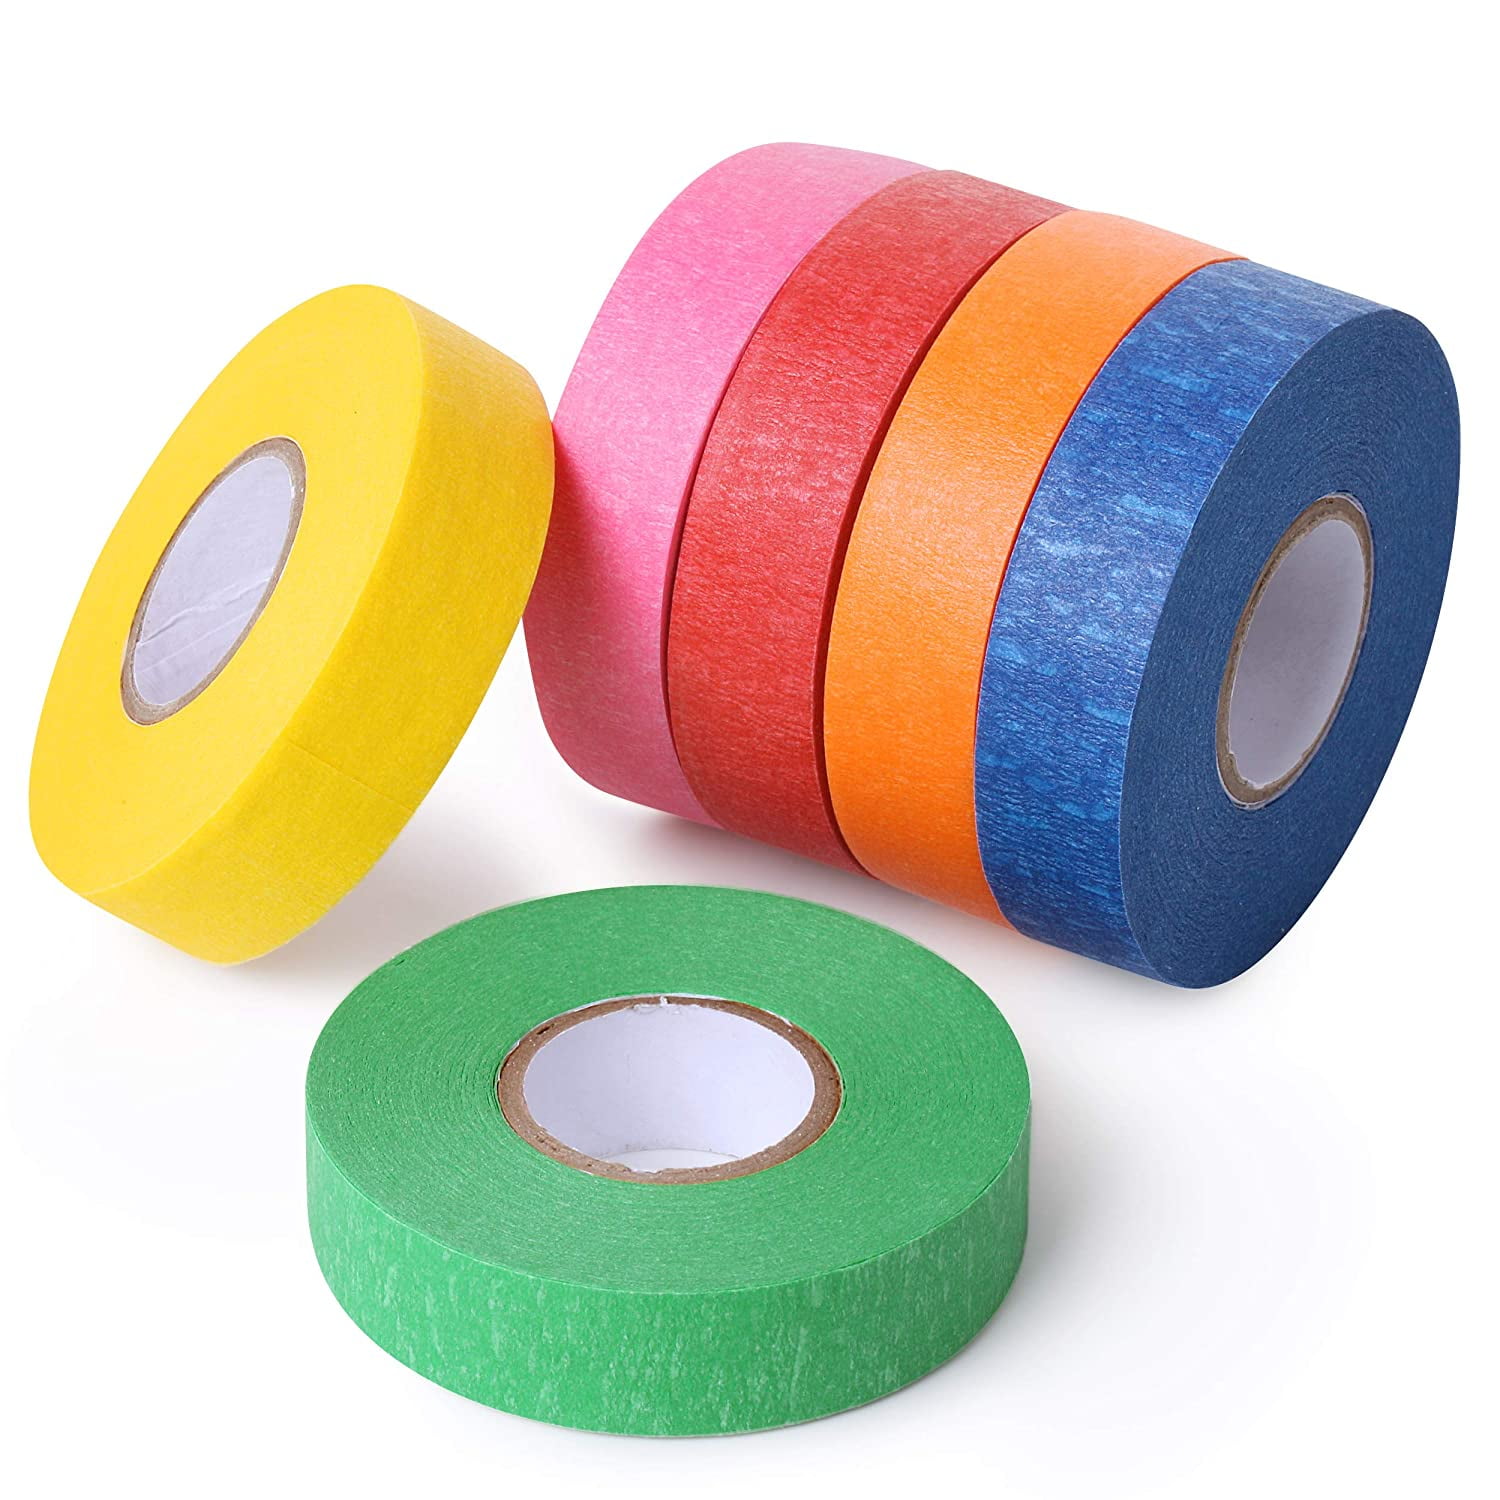 Colored Masking Tape, Colored Painters Tape for Arts and Crafts, 6 Pack,  Draft